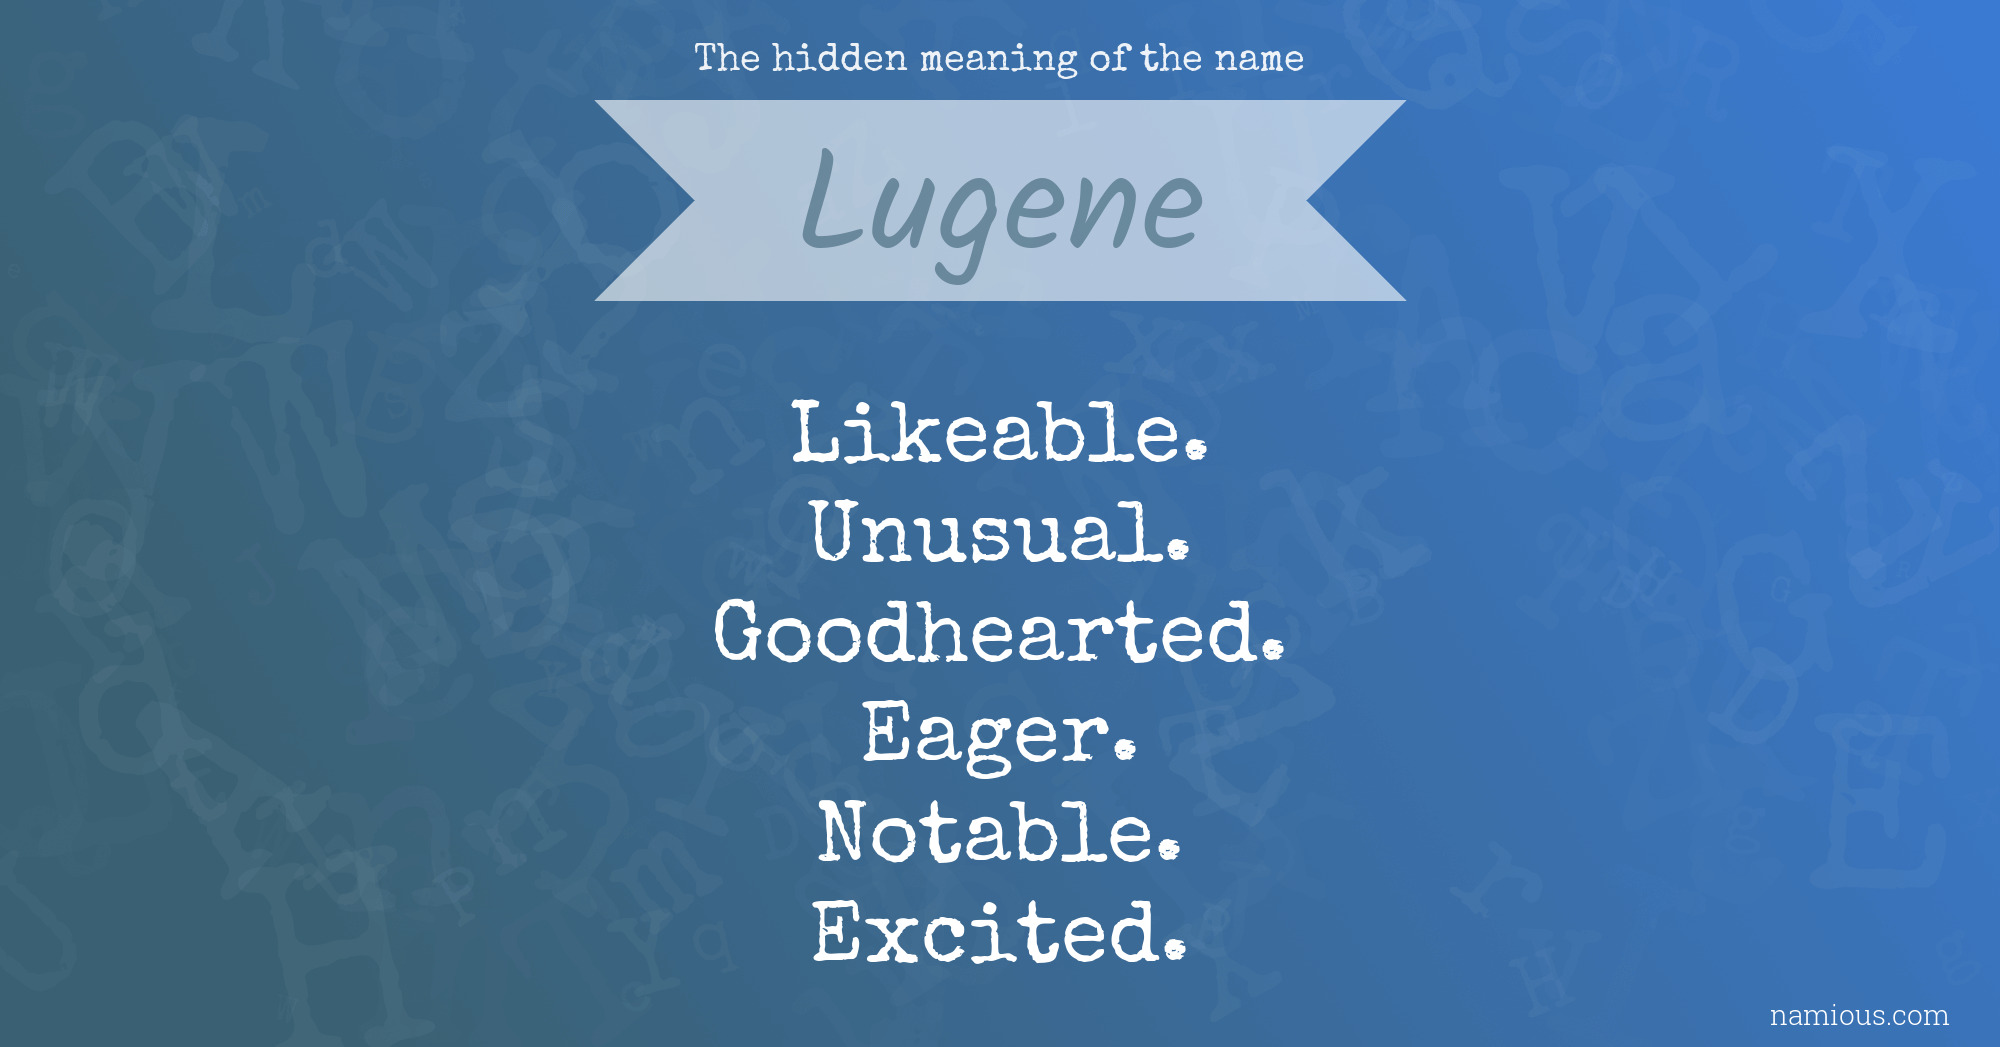 The hidden meaning of the name Lugene